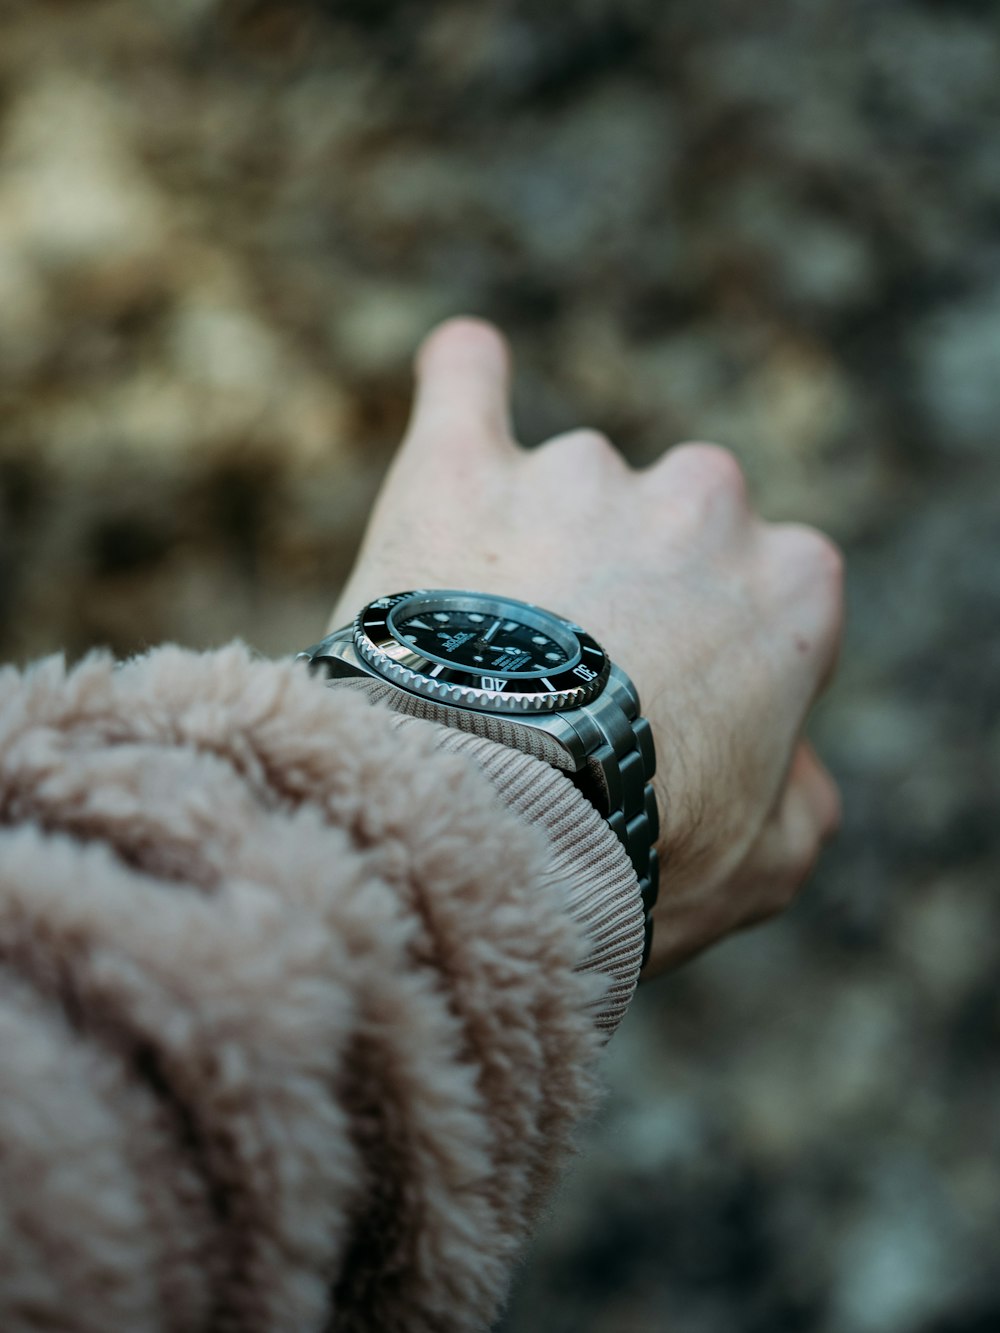 person wearing black and silver chronograph watch